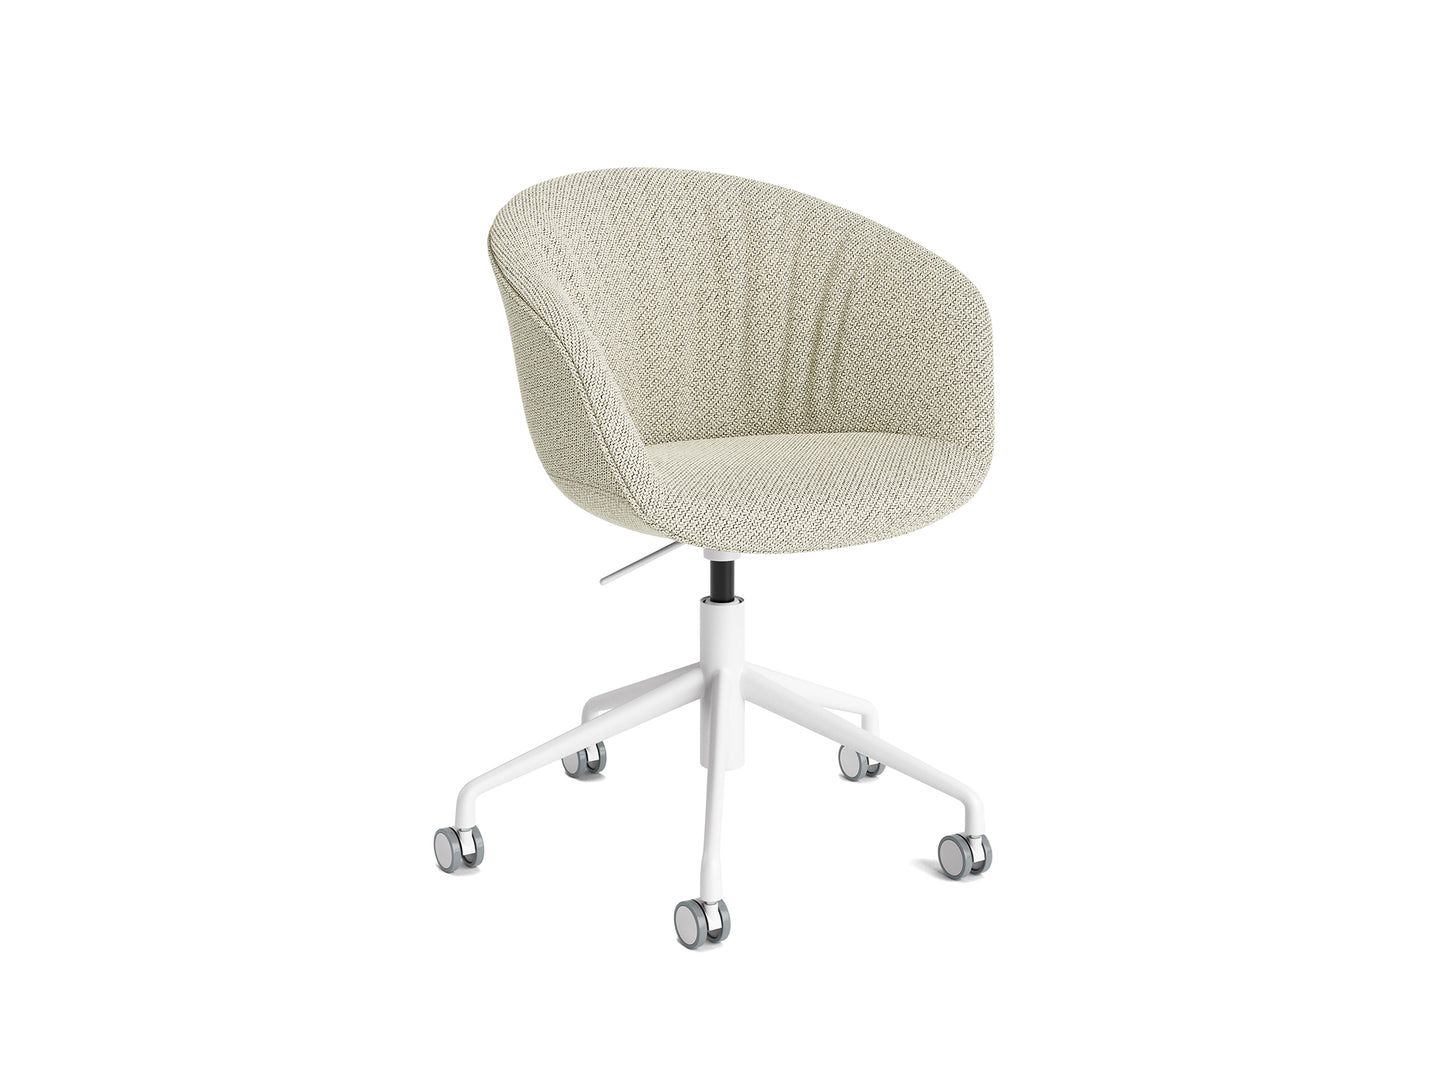 About A Chair AAC 53 Soft by HAY - Coda 100 / White Powder Coated Aluminium